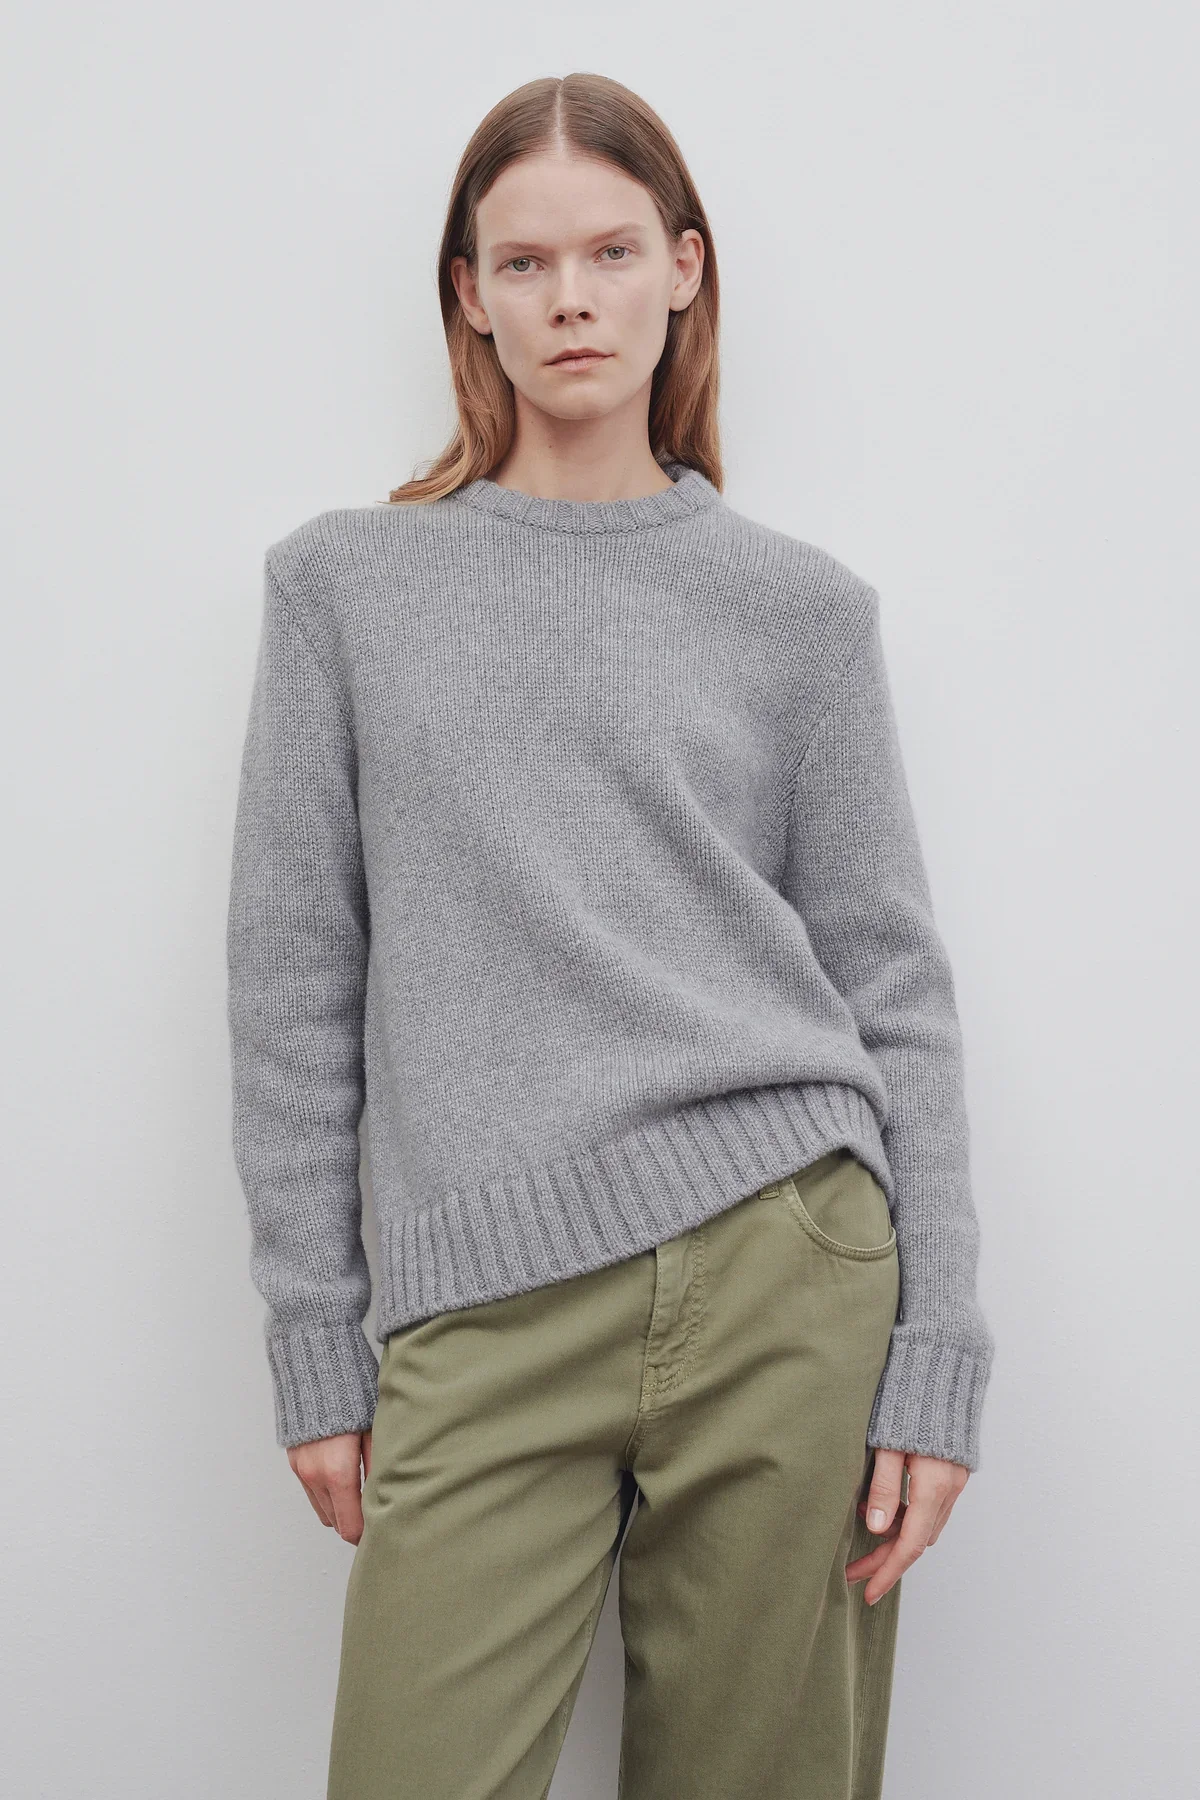 

The*R Benji Sweater In Cashmere Slim-fit Crewneck Knitwear With Ribbed Neckline Luxury Design Grey Pullovers Winter Women's Clot